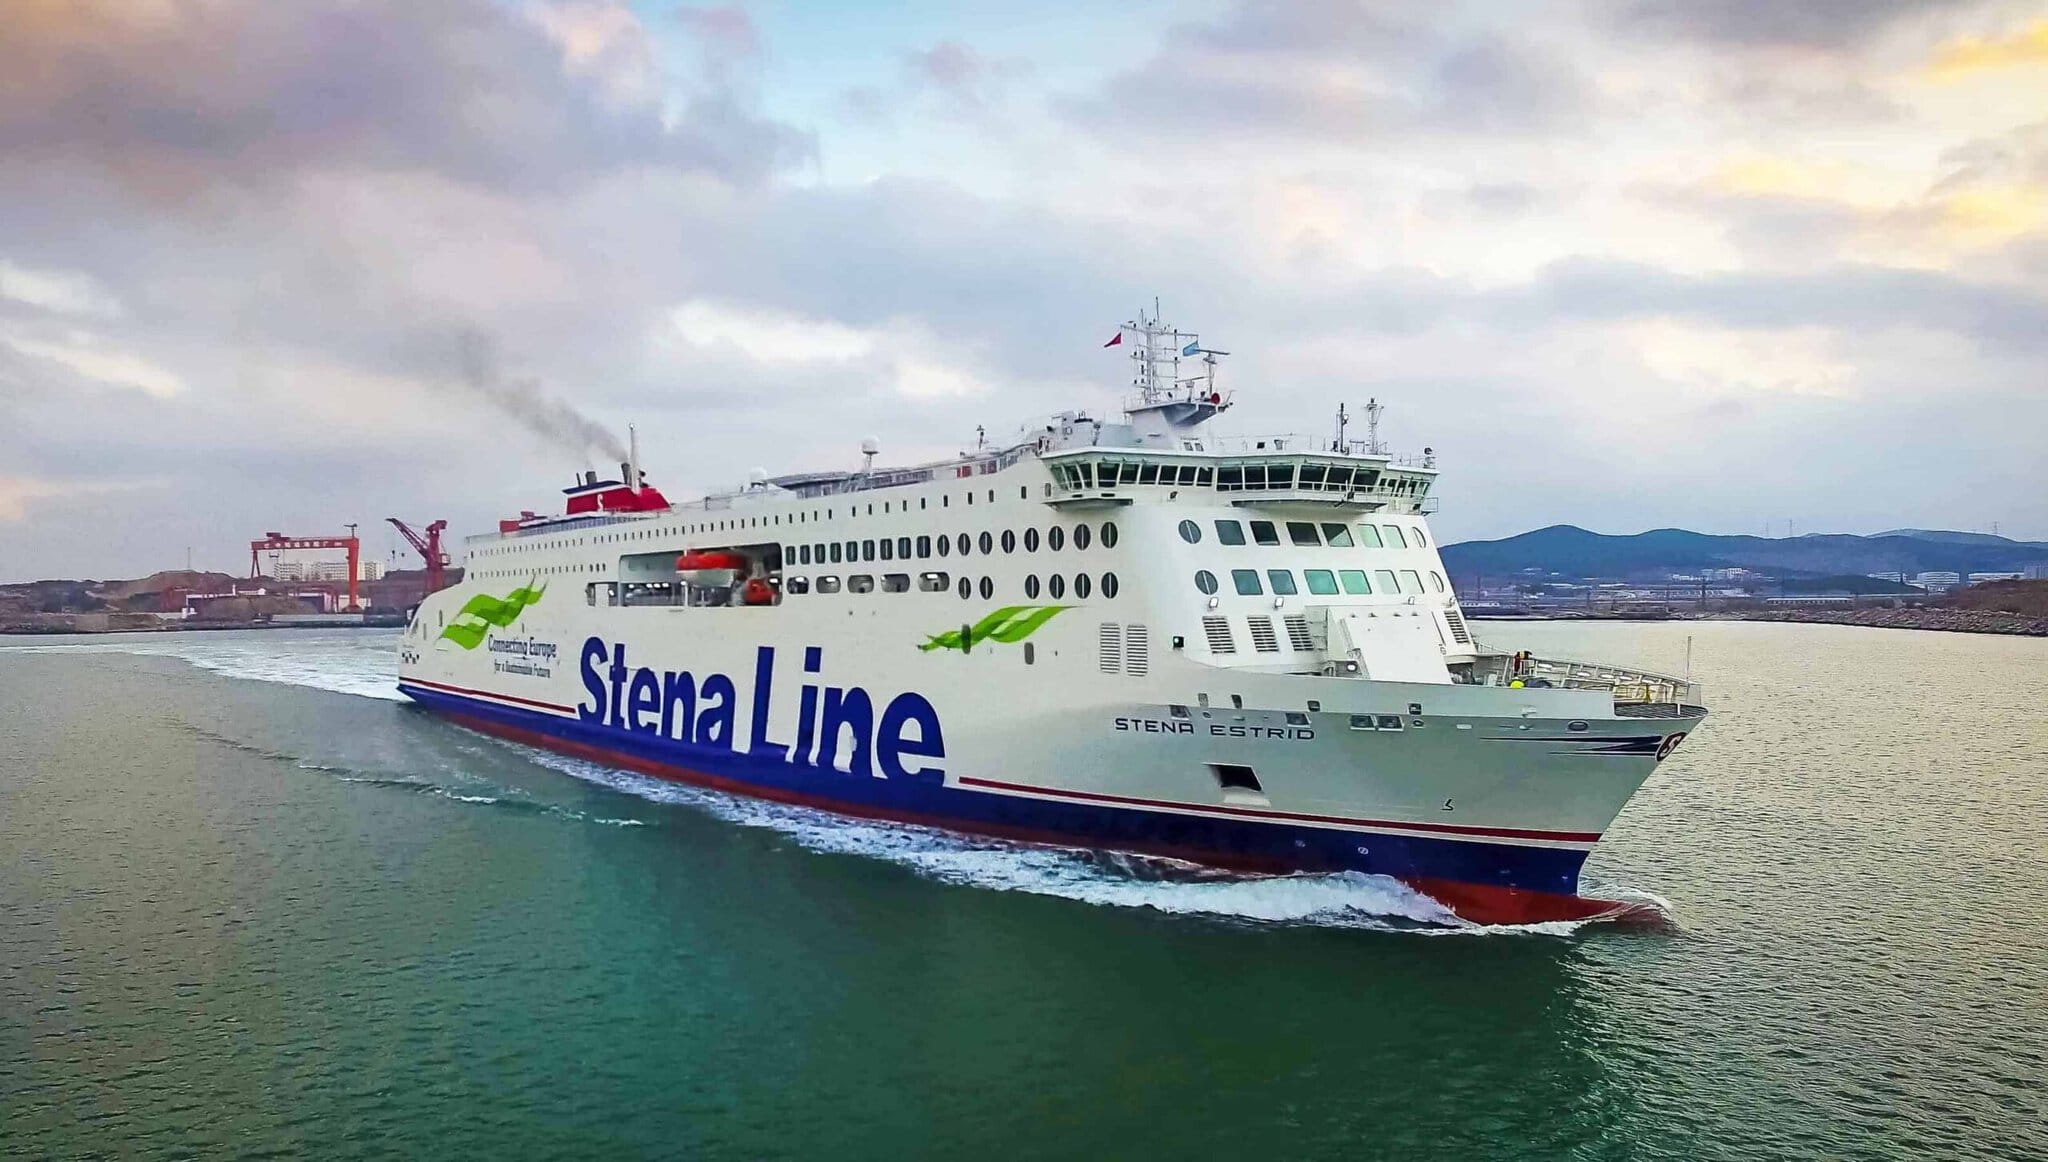 BON VOYAGE: Stena Line’s newest ferry Stena Estrid departs the AVIC Weihai Shipyard in north-western China, bound for its new home on the Irish Sea between Ireland and Britain. Manned by a much-reduced crew of 27, with no passengers on board, the ship will travel on a journey of well over 10,000 miles, taking just over one month and making a number of stops on the way, before finally arriving in Wales from where it will start service in January on the Dublin to Holyhead route.